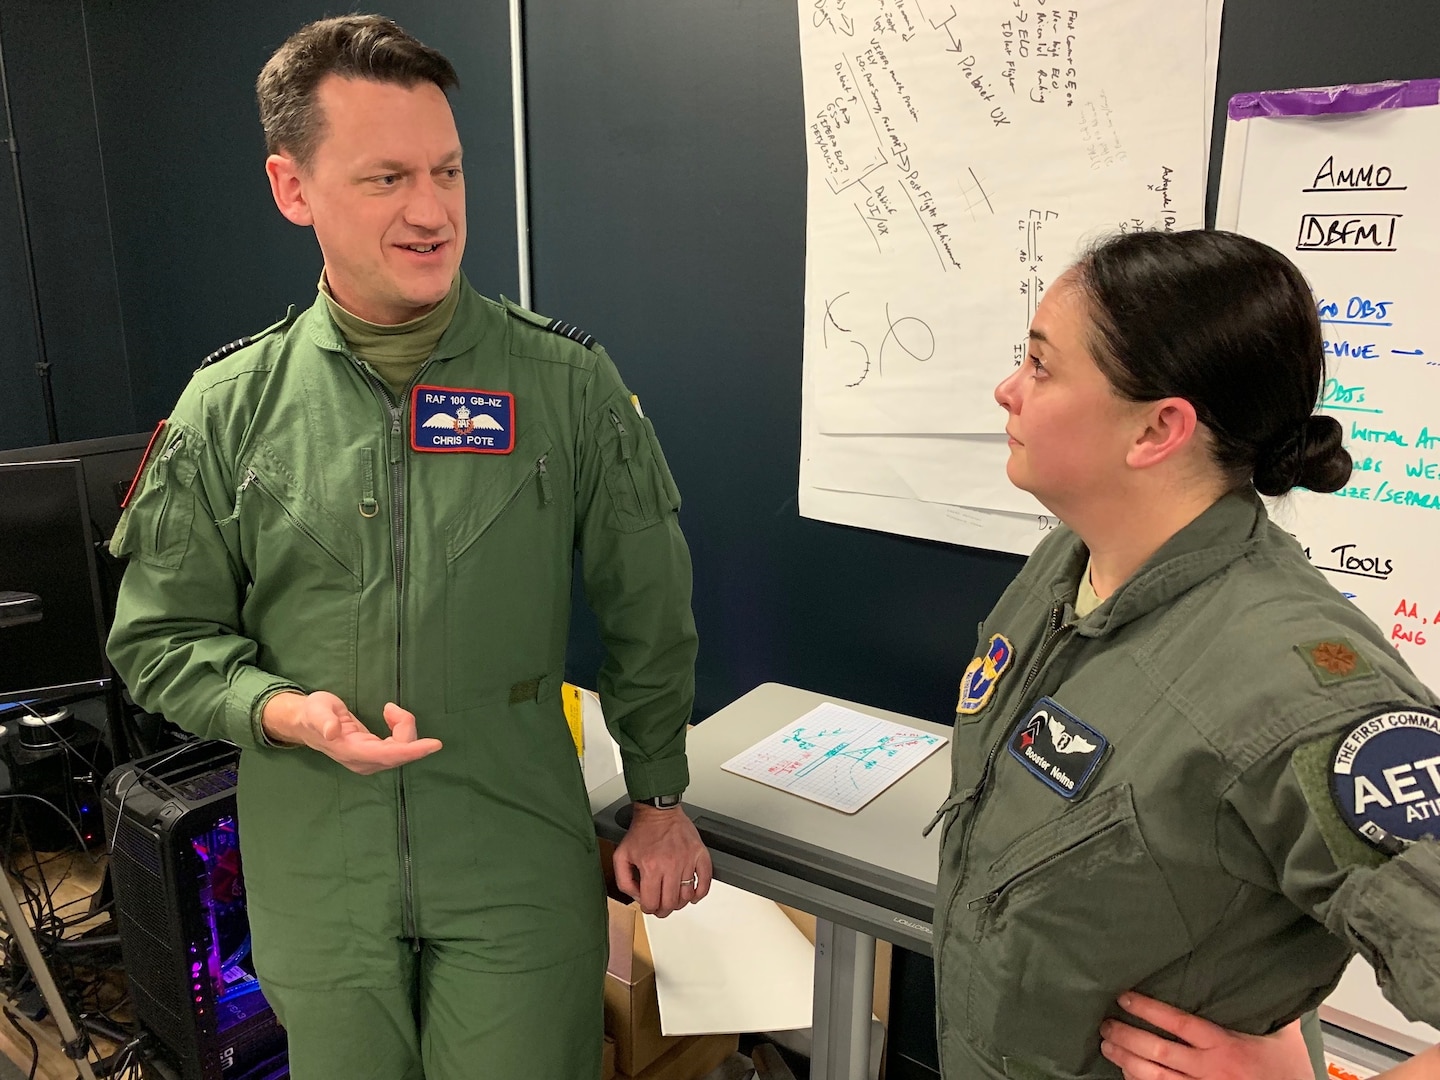 U.S. Air Force Maj. Joanna Nelms, Pilot Training Next 2.0 flight doctor from the 359th Medical Group, talks to Royal Air Force Wing Commander Christopher Pote, Headquarters 22 Group, at the PTN facility at the Armed Forces Reserve Center in Austin, Texas, March 18. The RAF is participating in PTN's second iteration in an effort to accelerate learning and increase pilot production.